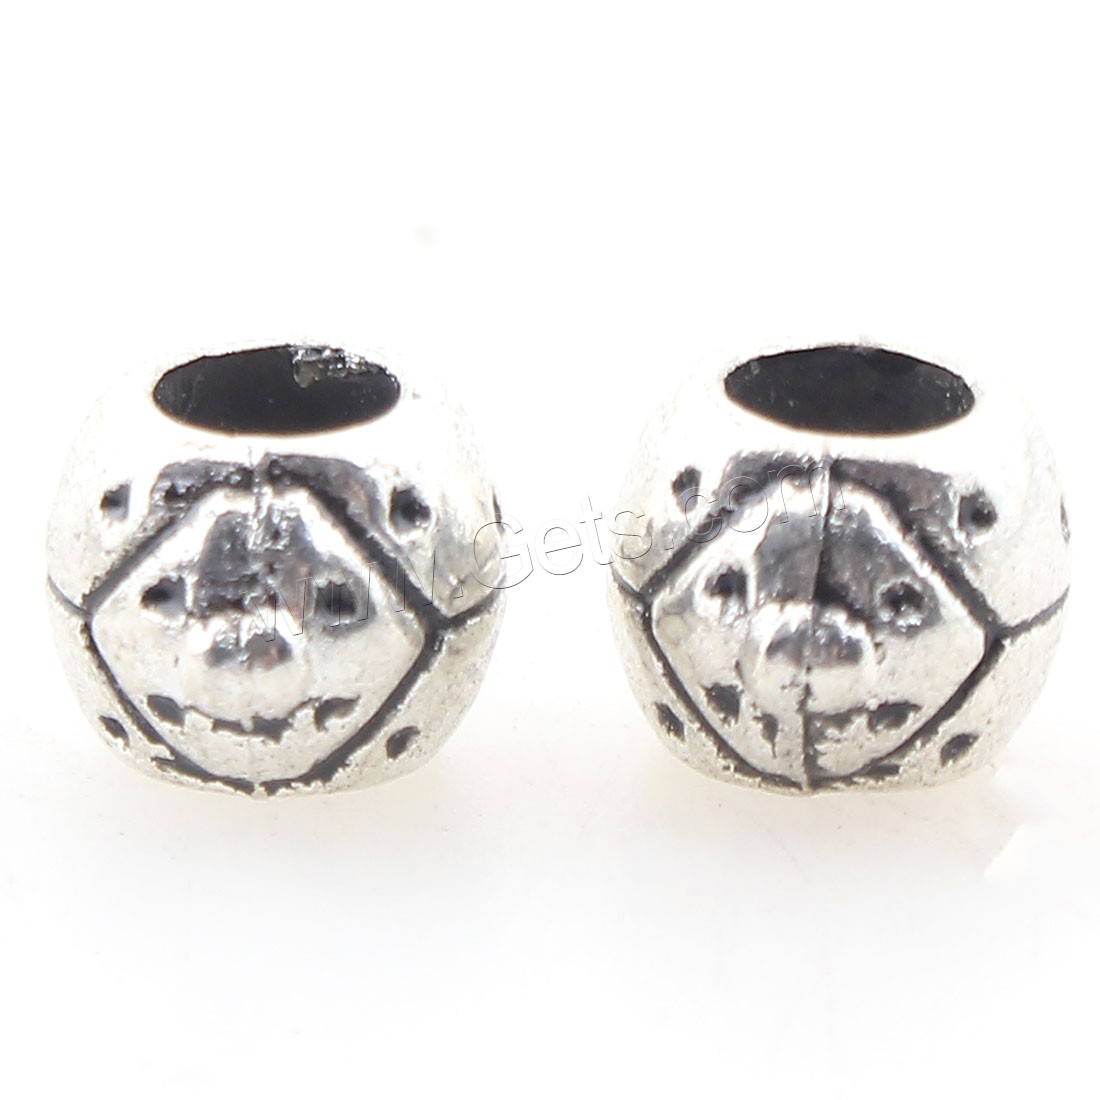 Zinc Alloy Jewelry Beads, antique silver color plated, more colors for choice, 10x8mm, Hole:Approx 5mm, Approx 250PCs/Bag, Sold By Bag